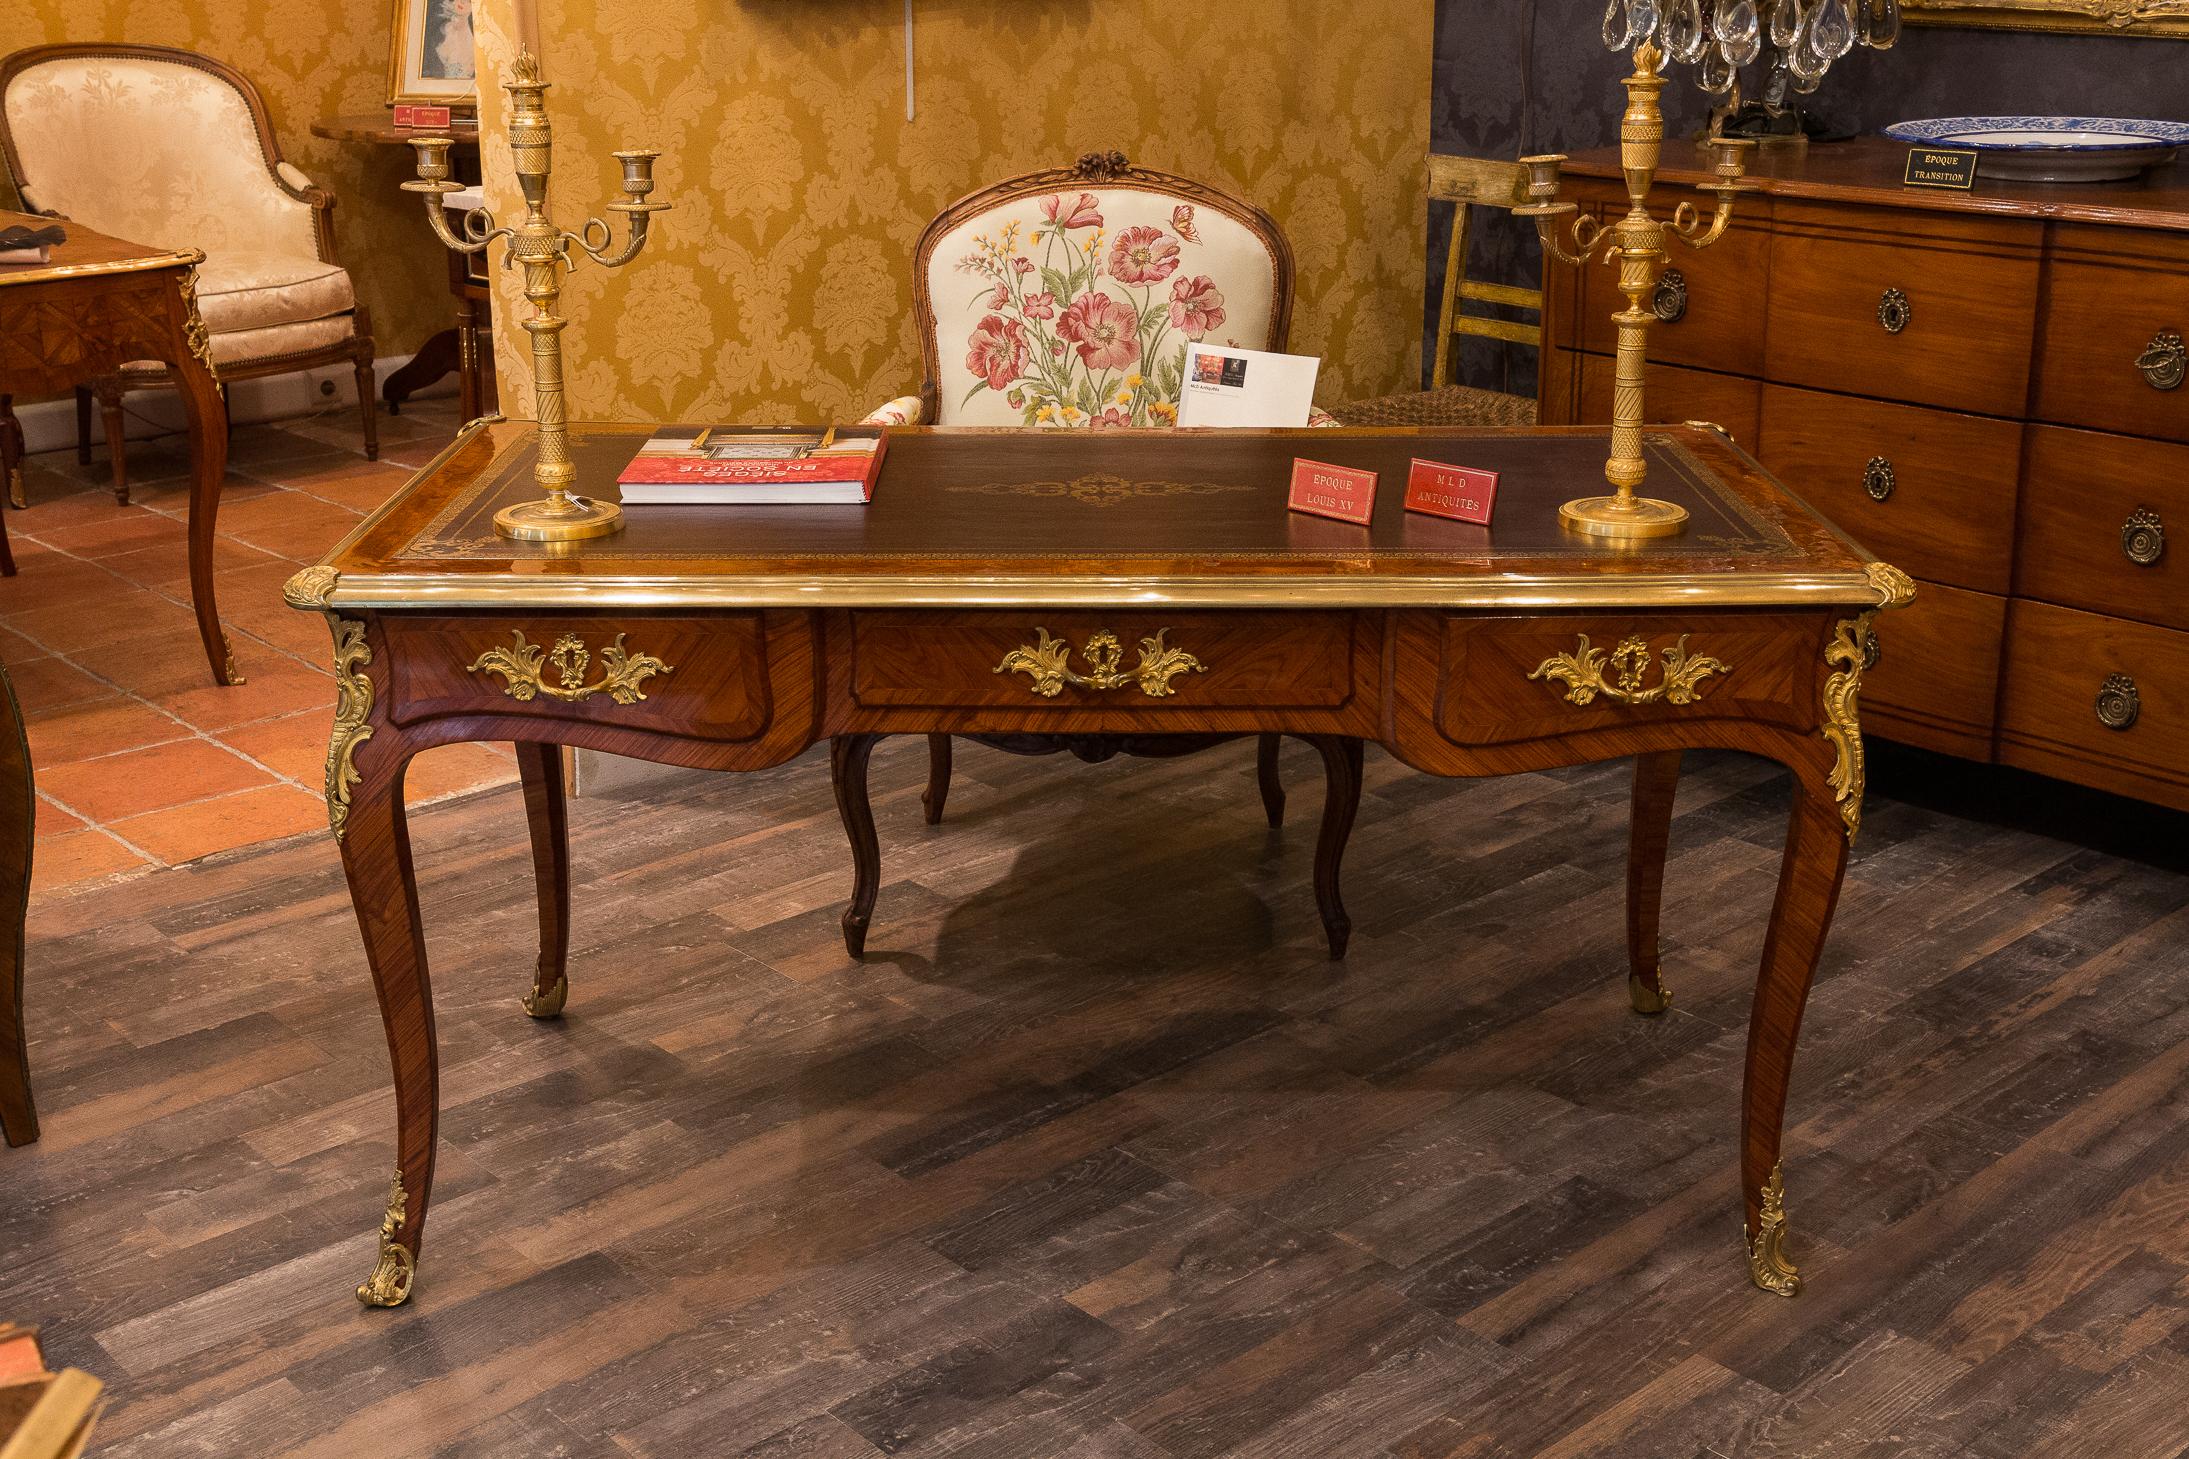 French Louis Period, Flat Violetwood Desk with Gilt-Bronze Decoration circa 1750 im Angebot 1